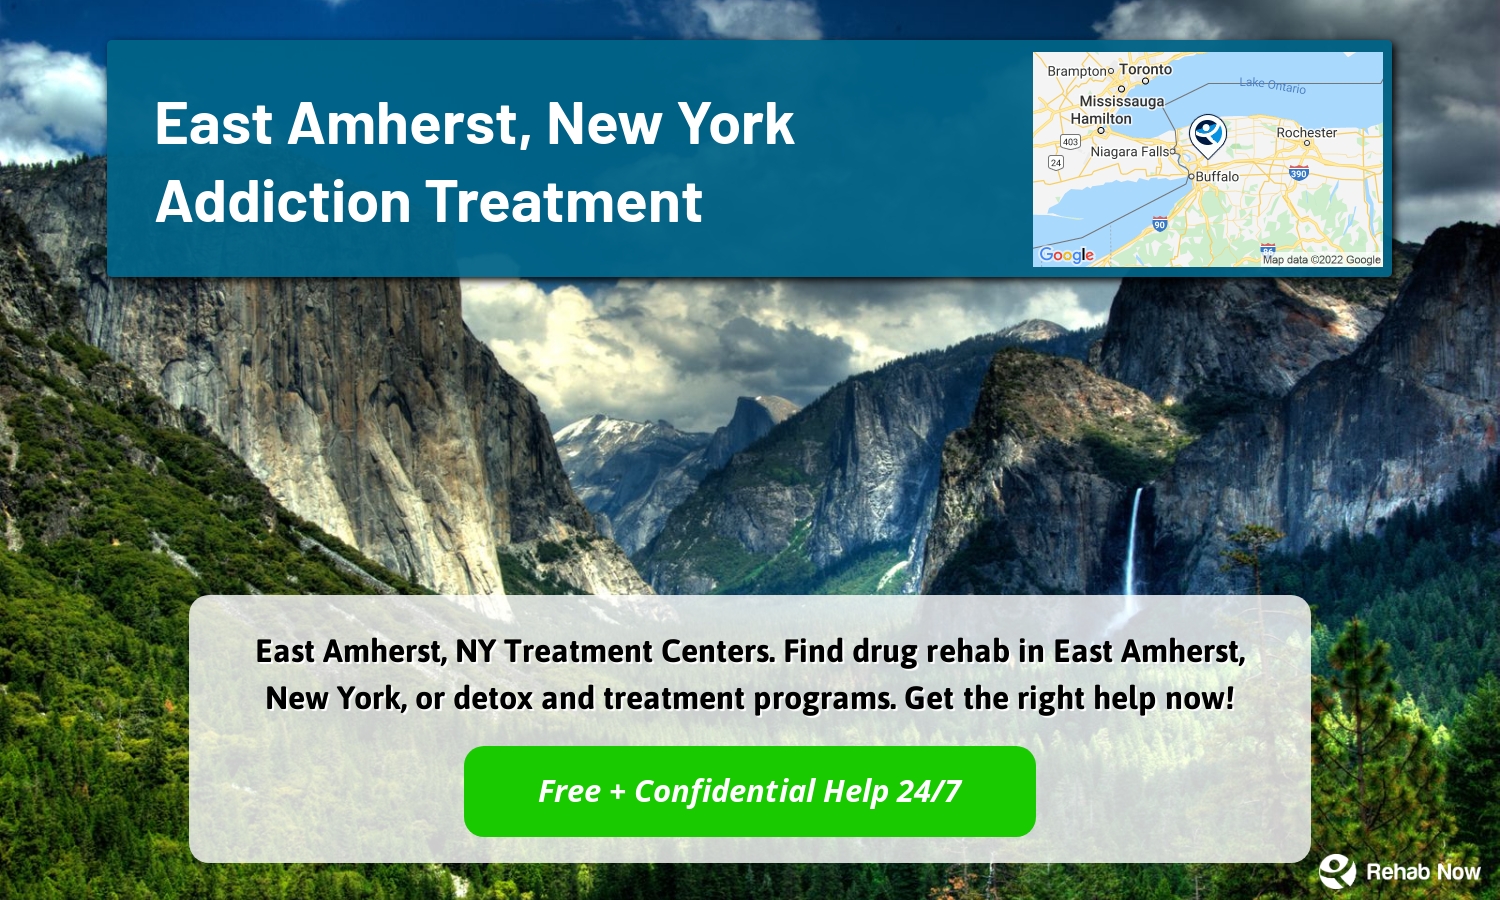 East Amherst, NY Treatment Centers. Find drug rehab in East Amherst, New York, or detox and treatment programs. Get the right help now!